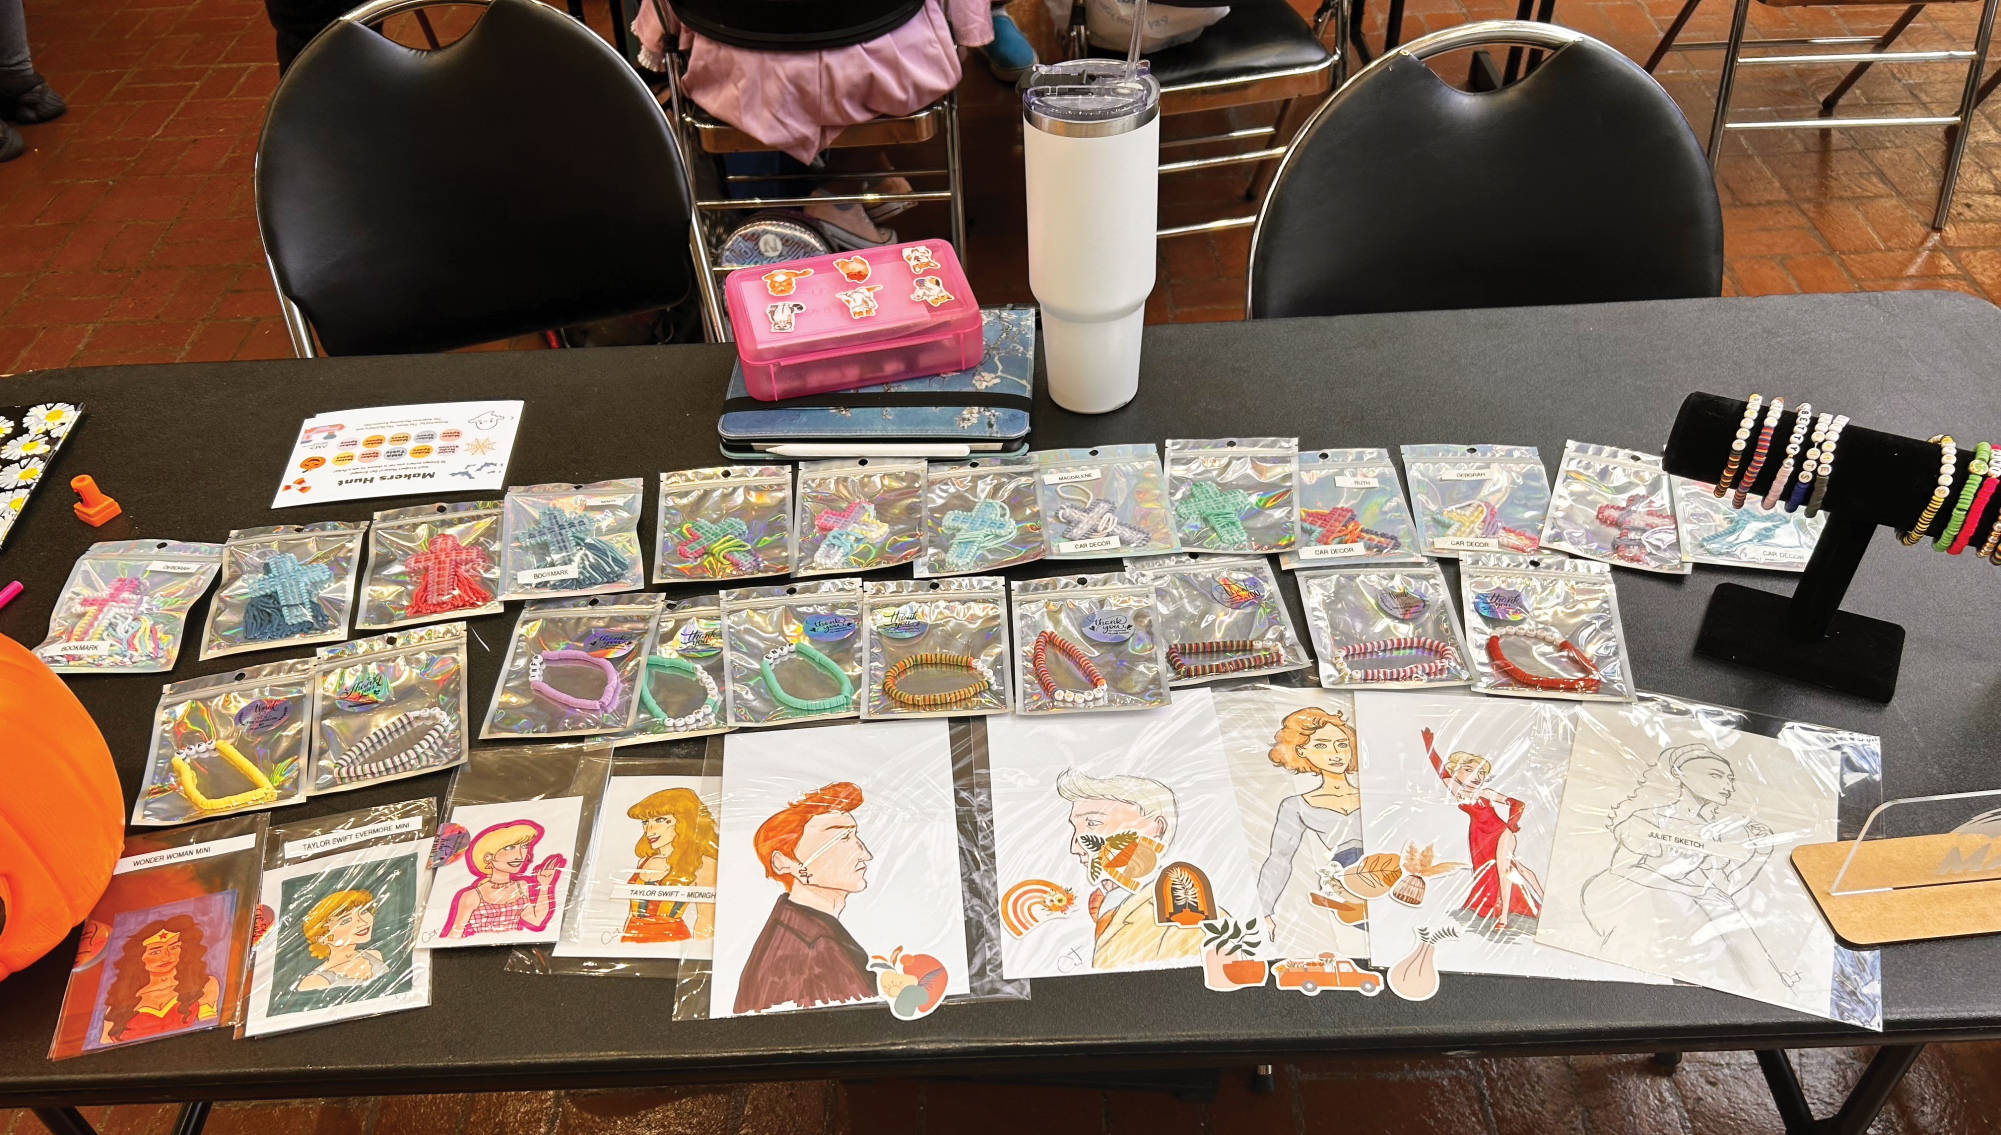 The Halloween Makers’ Market was held on Oct. 27, with many student creators showing up to sell their wares. One maker’s table featured bracelets, drawings and bookmarks.    						                                      